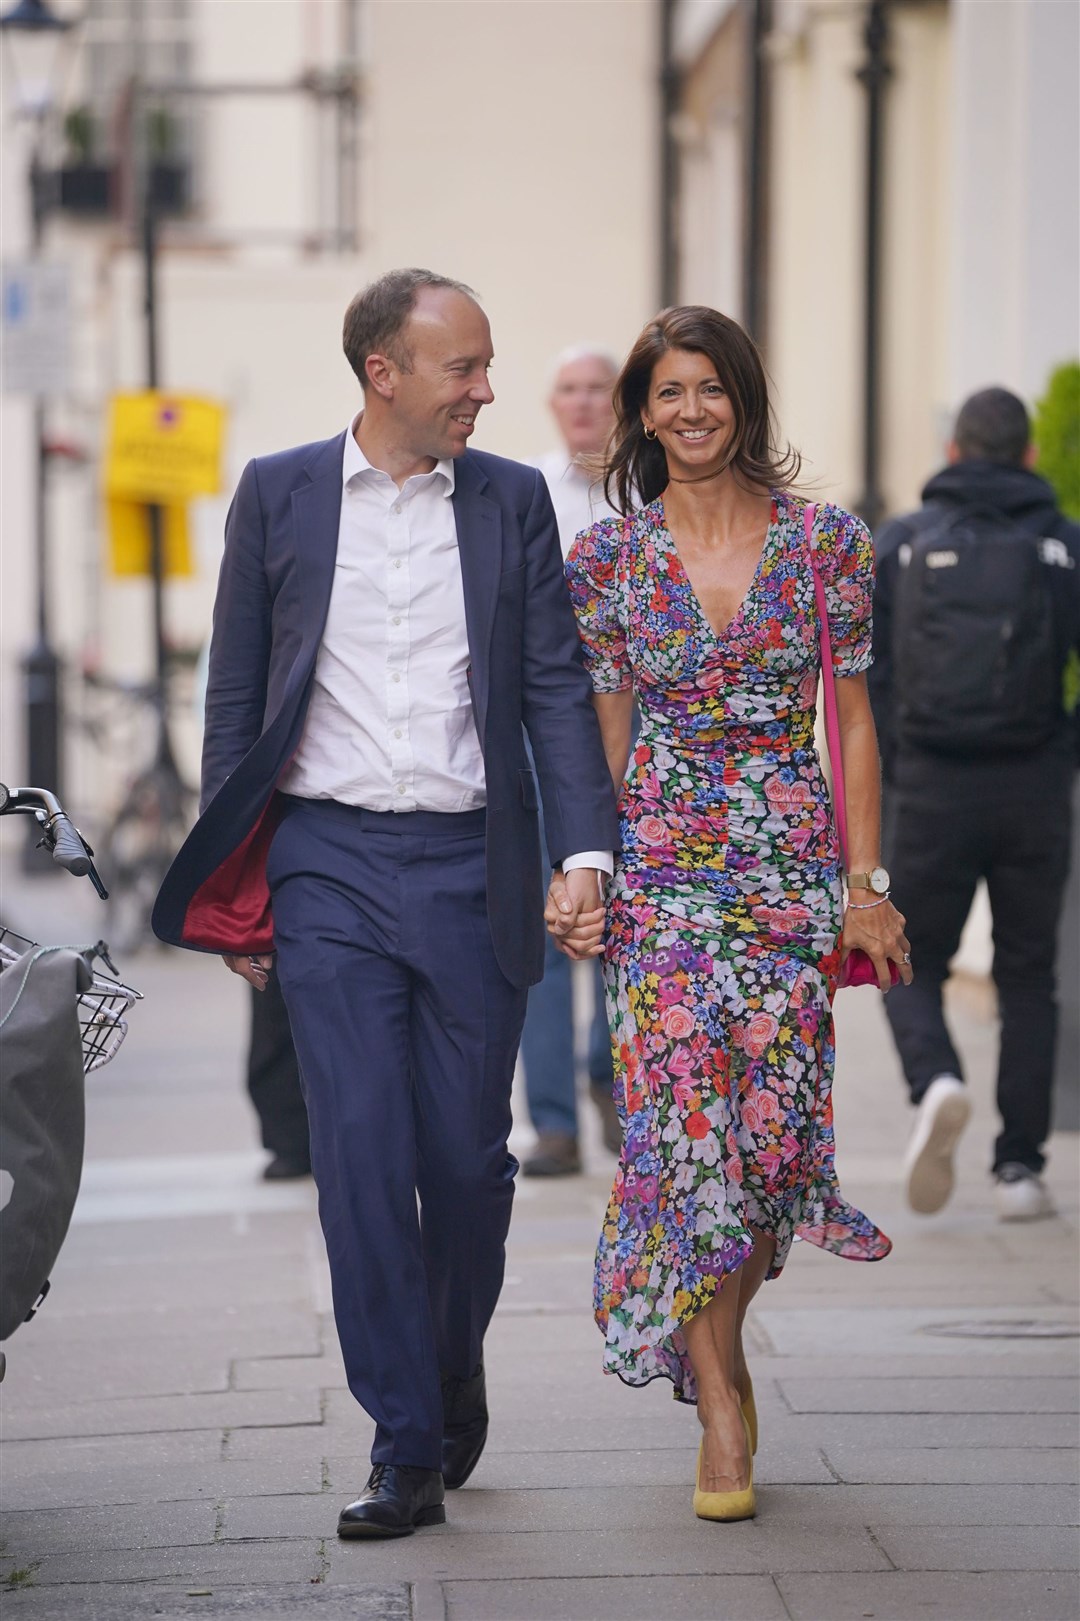 Former health secretary Matt Hancock and Gina Coladangelo arrive for The Spectator’s Summer Party (Lucy North/PA)